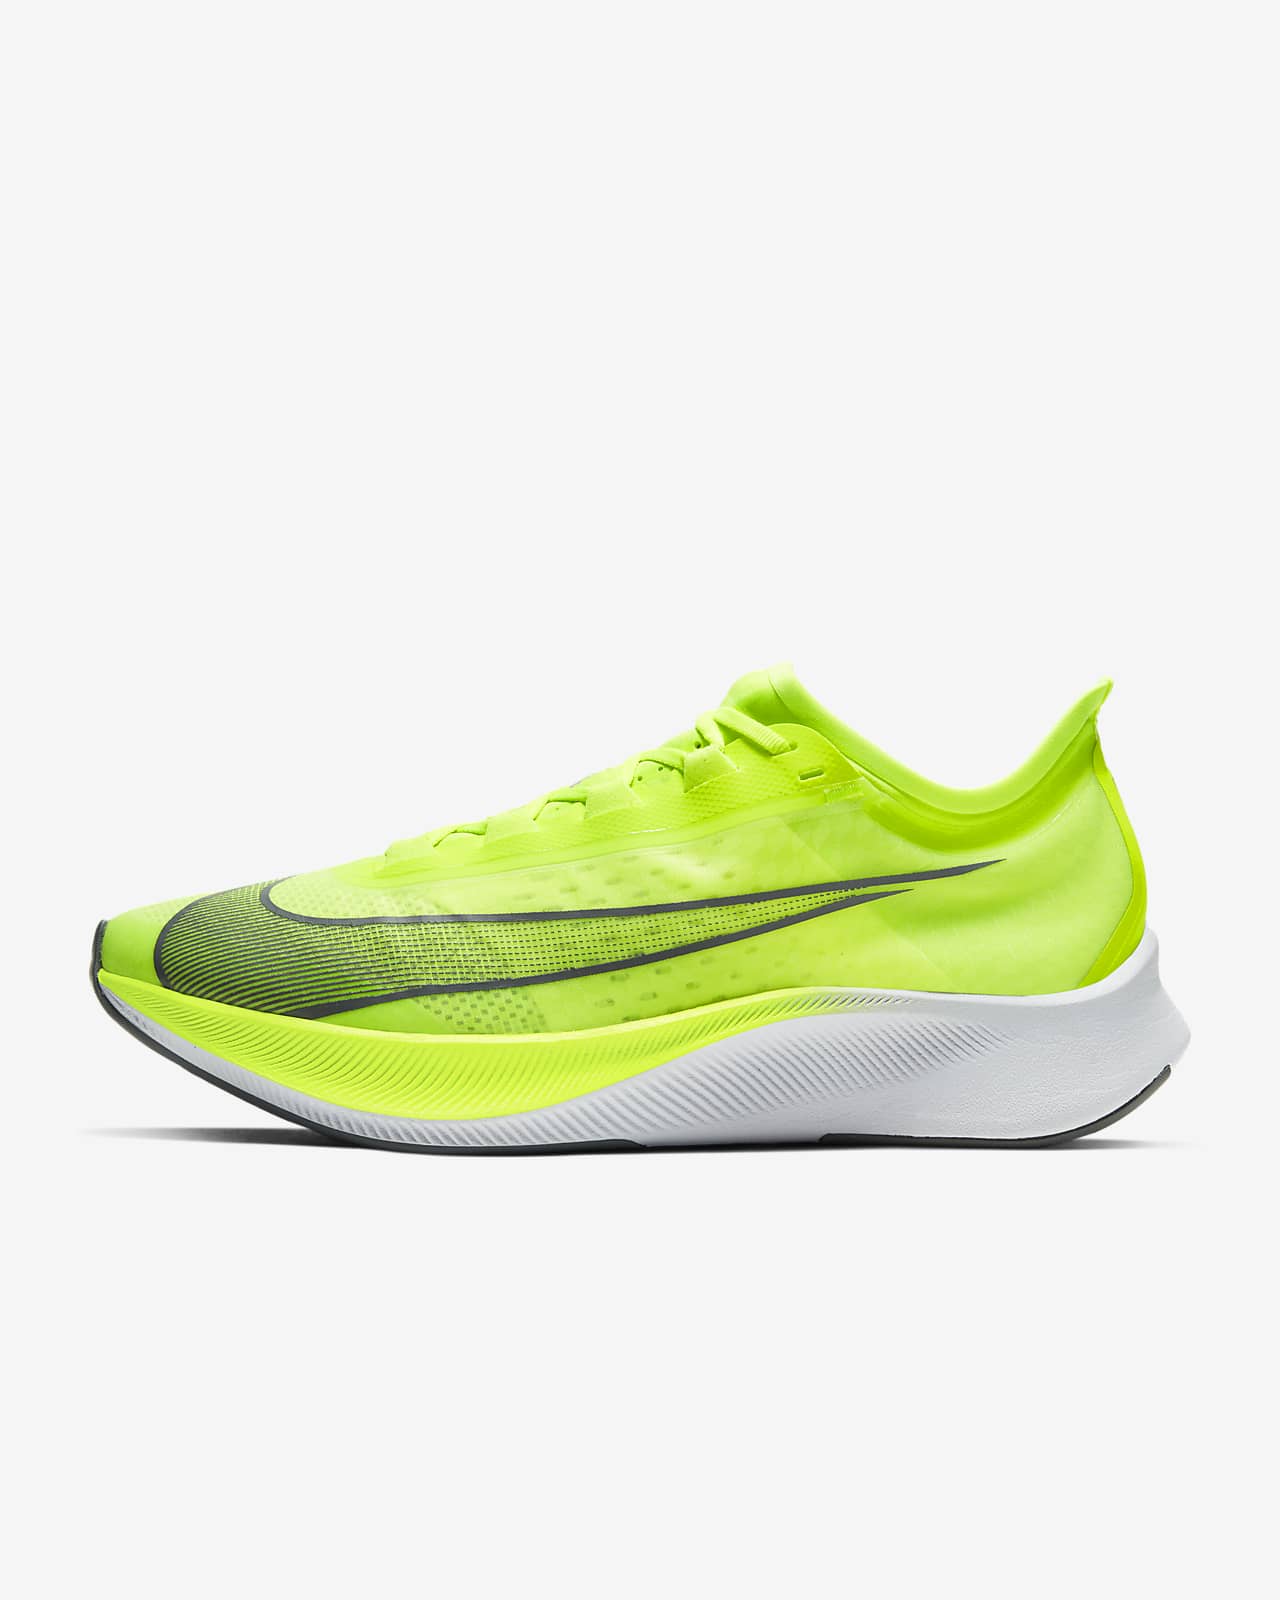 Nike Zoom Fly 3 Men's Road Running Shoes ماطور هواء السنيدي